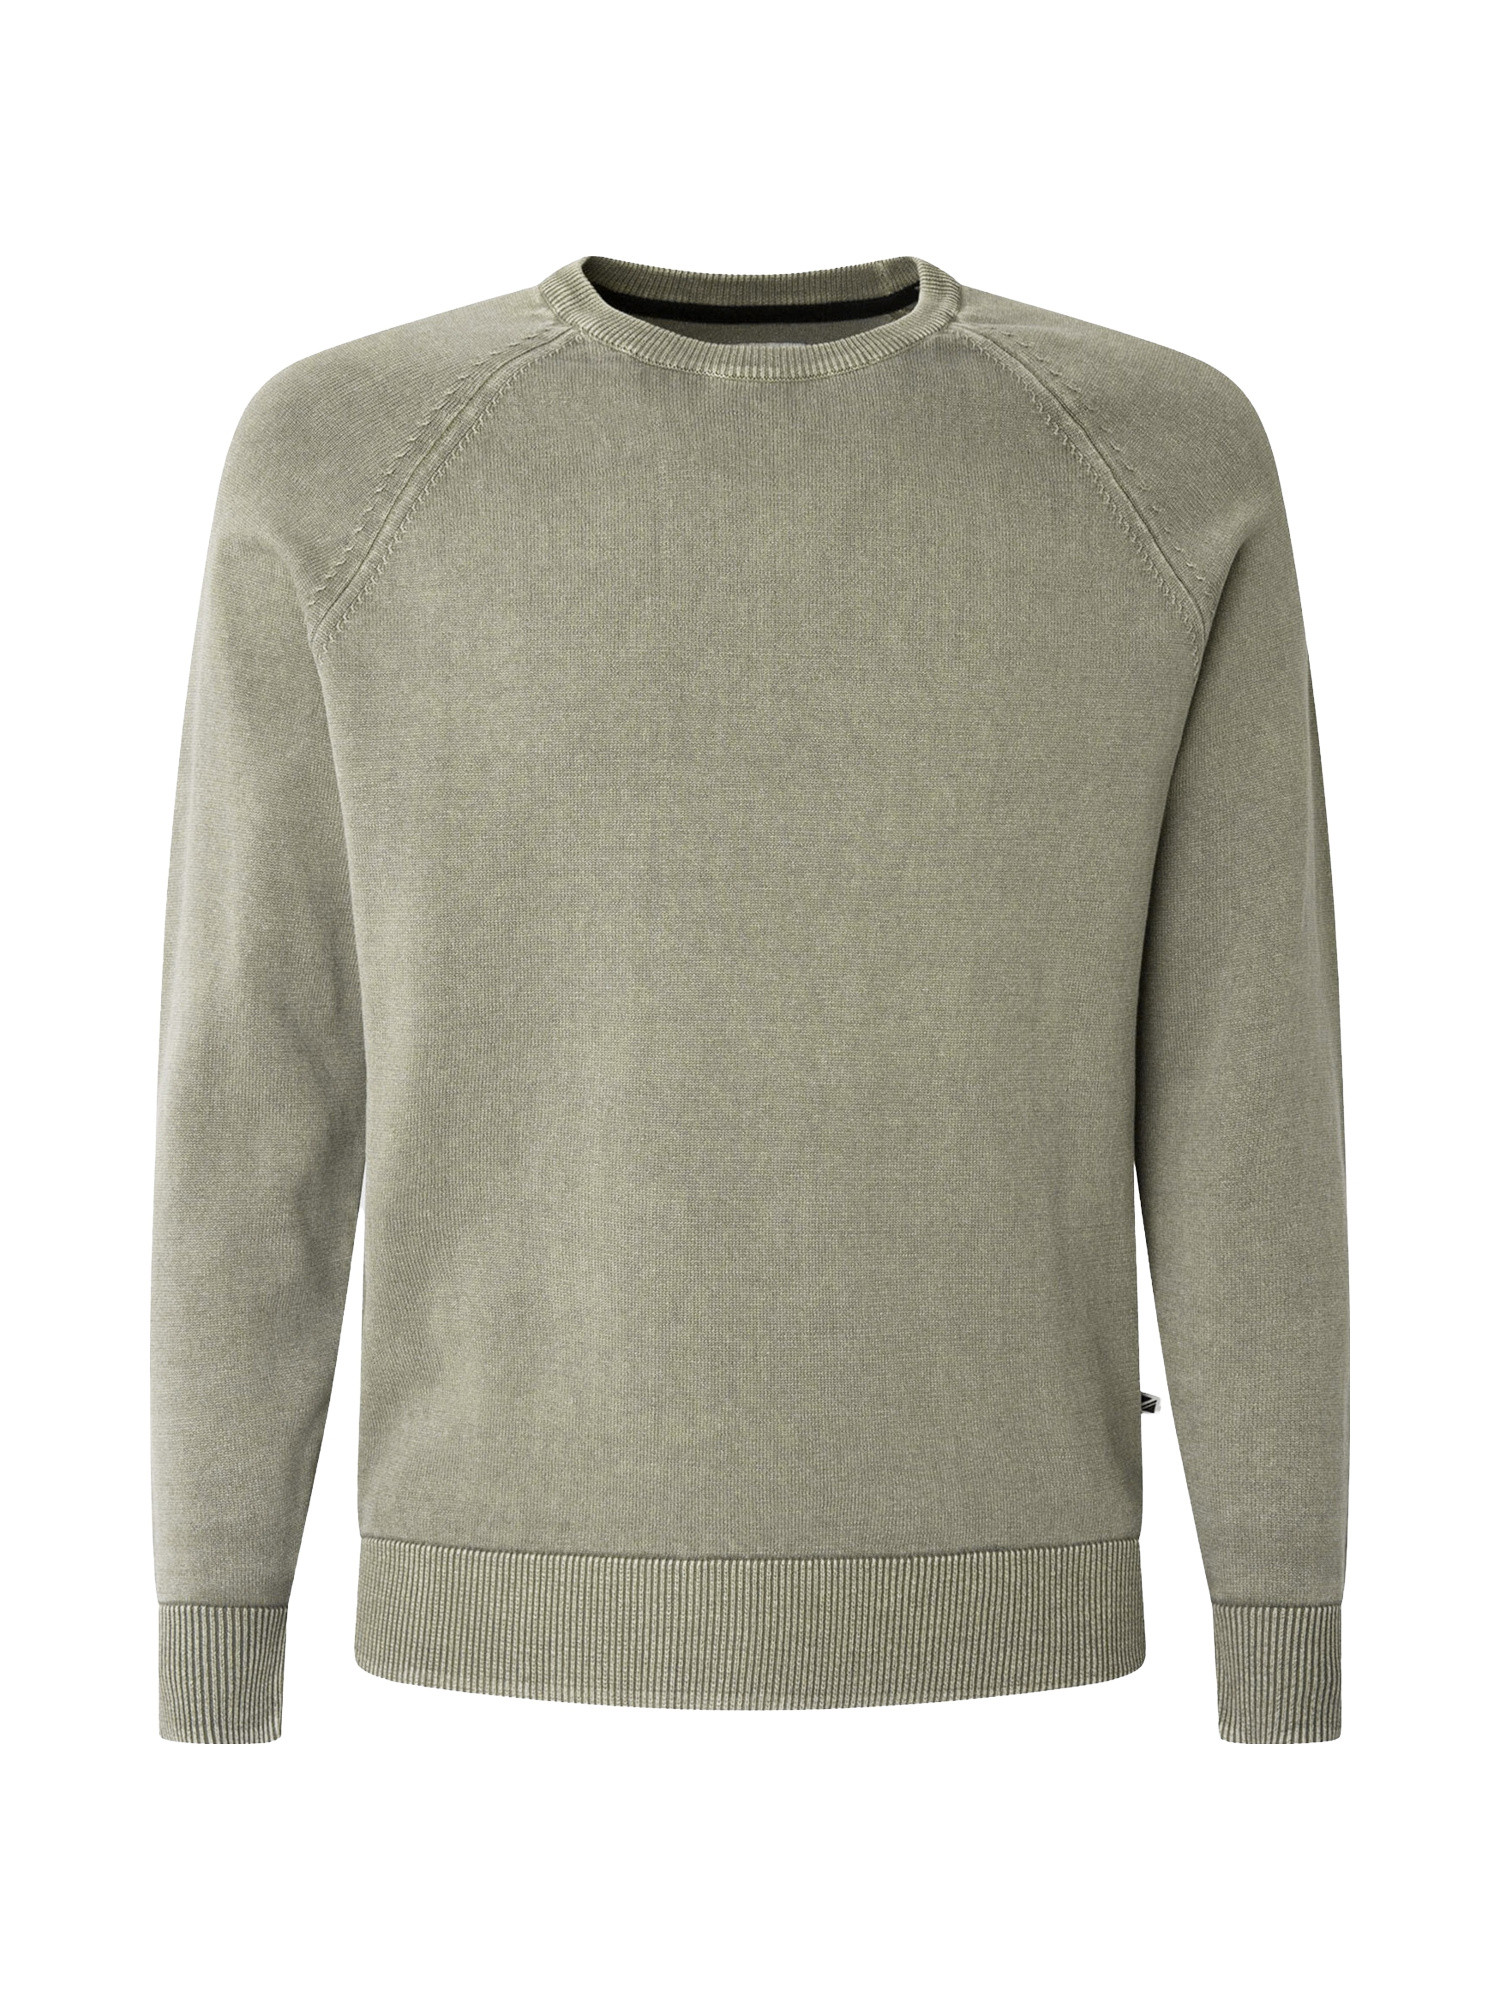 Pepe Jeans - Pullover girocollo in cotone, Verde, large image number 0